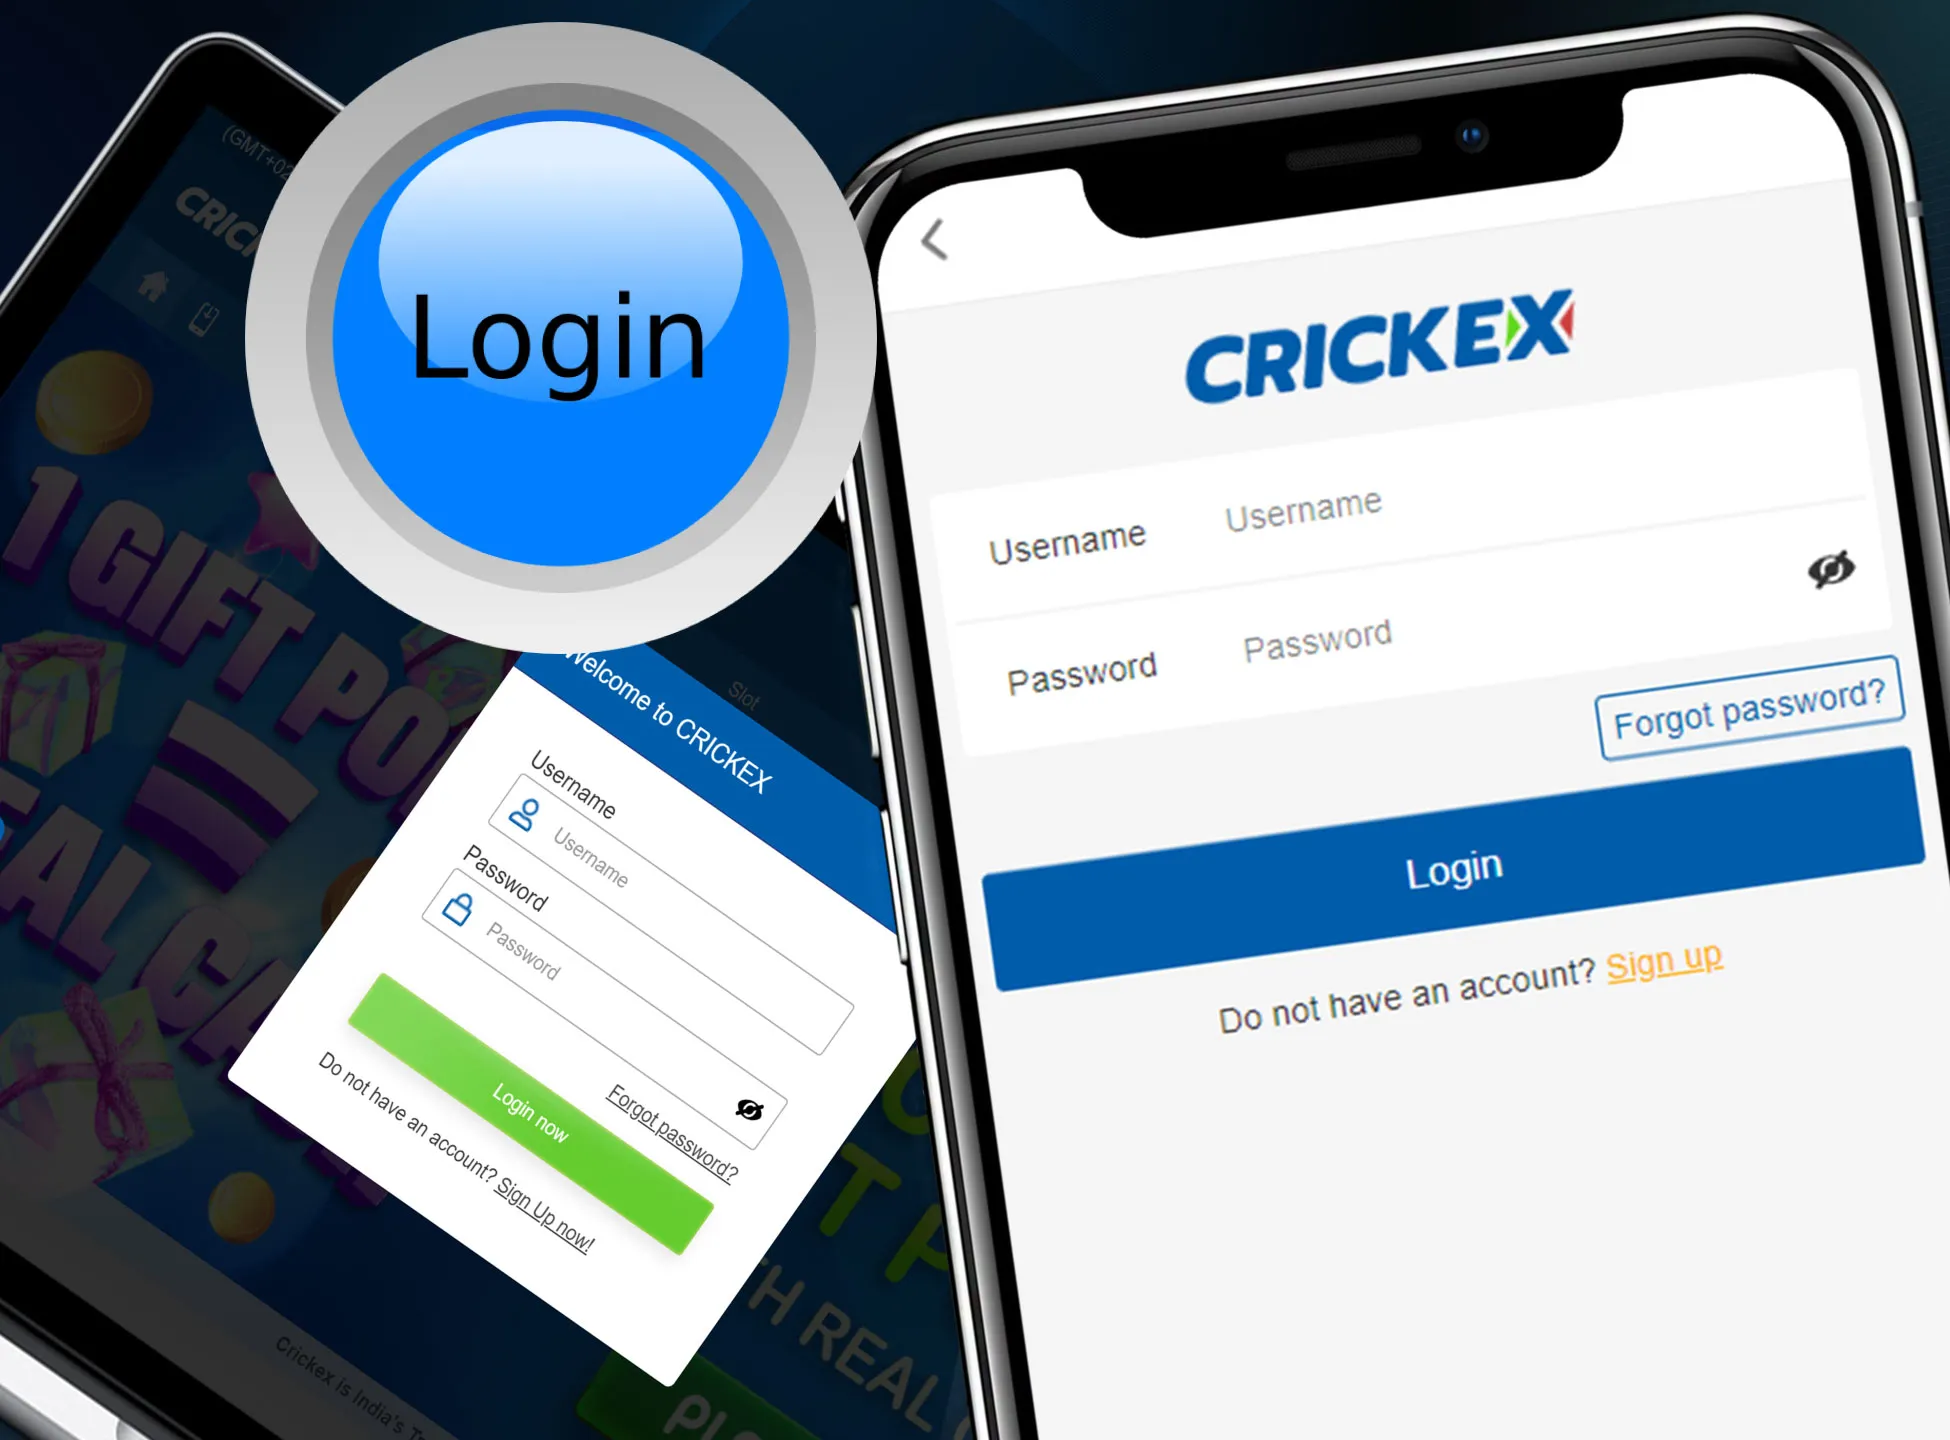 Log in to the Crickex account with your username and password.